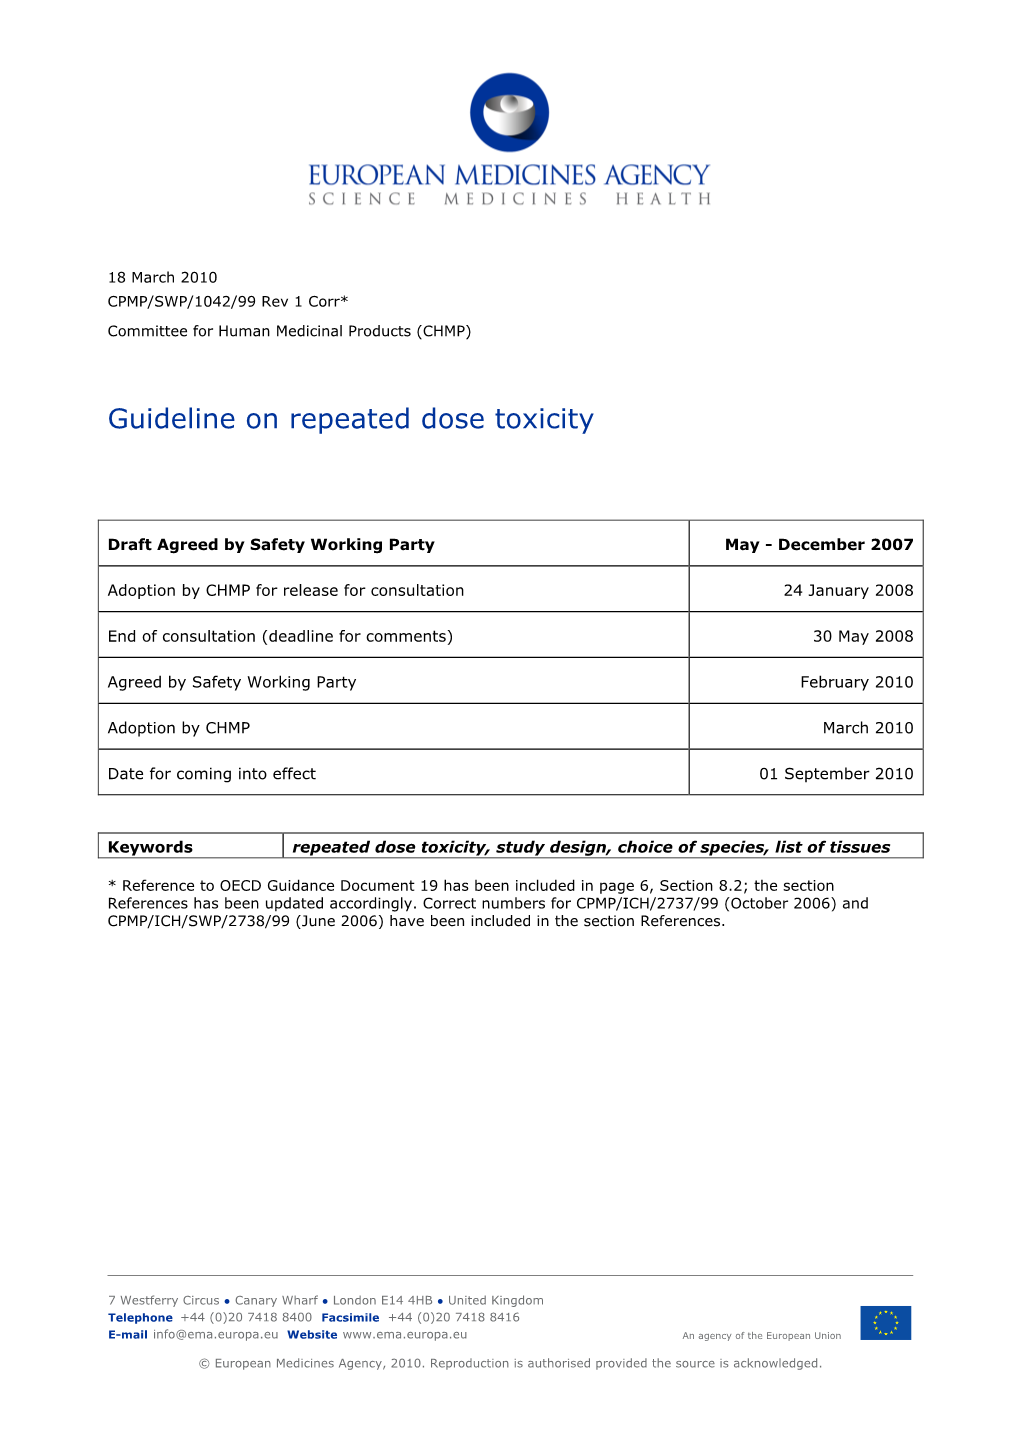 Guideline on Repeated Dose Toxicity Corr